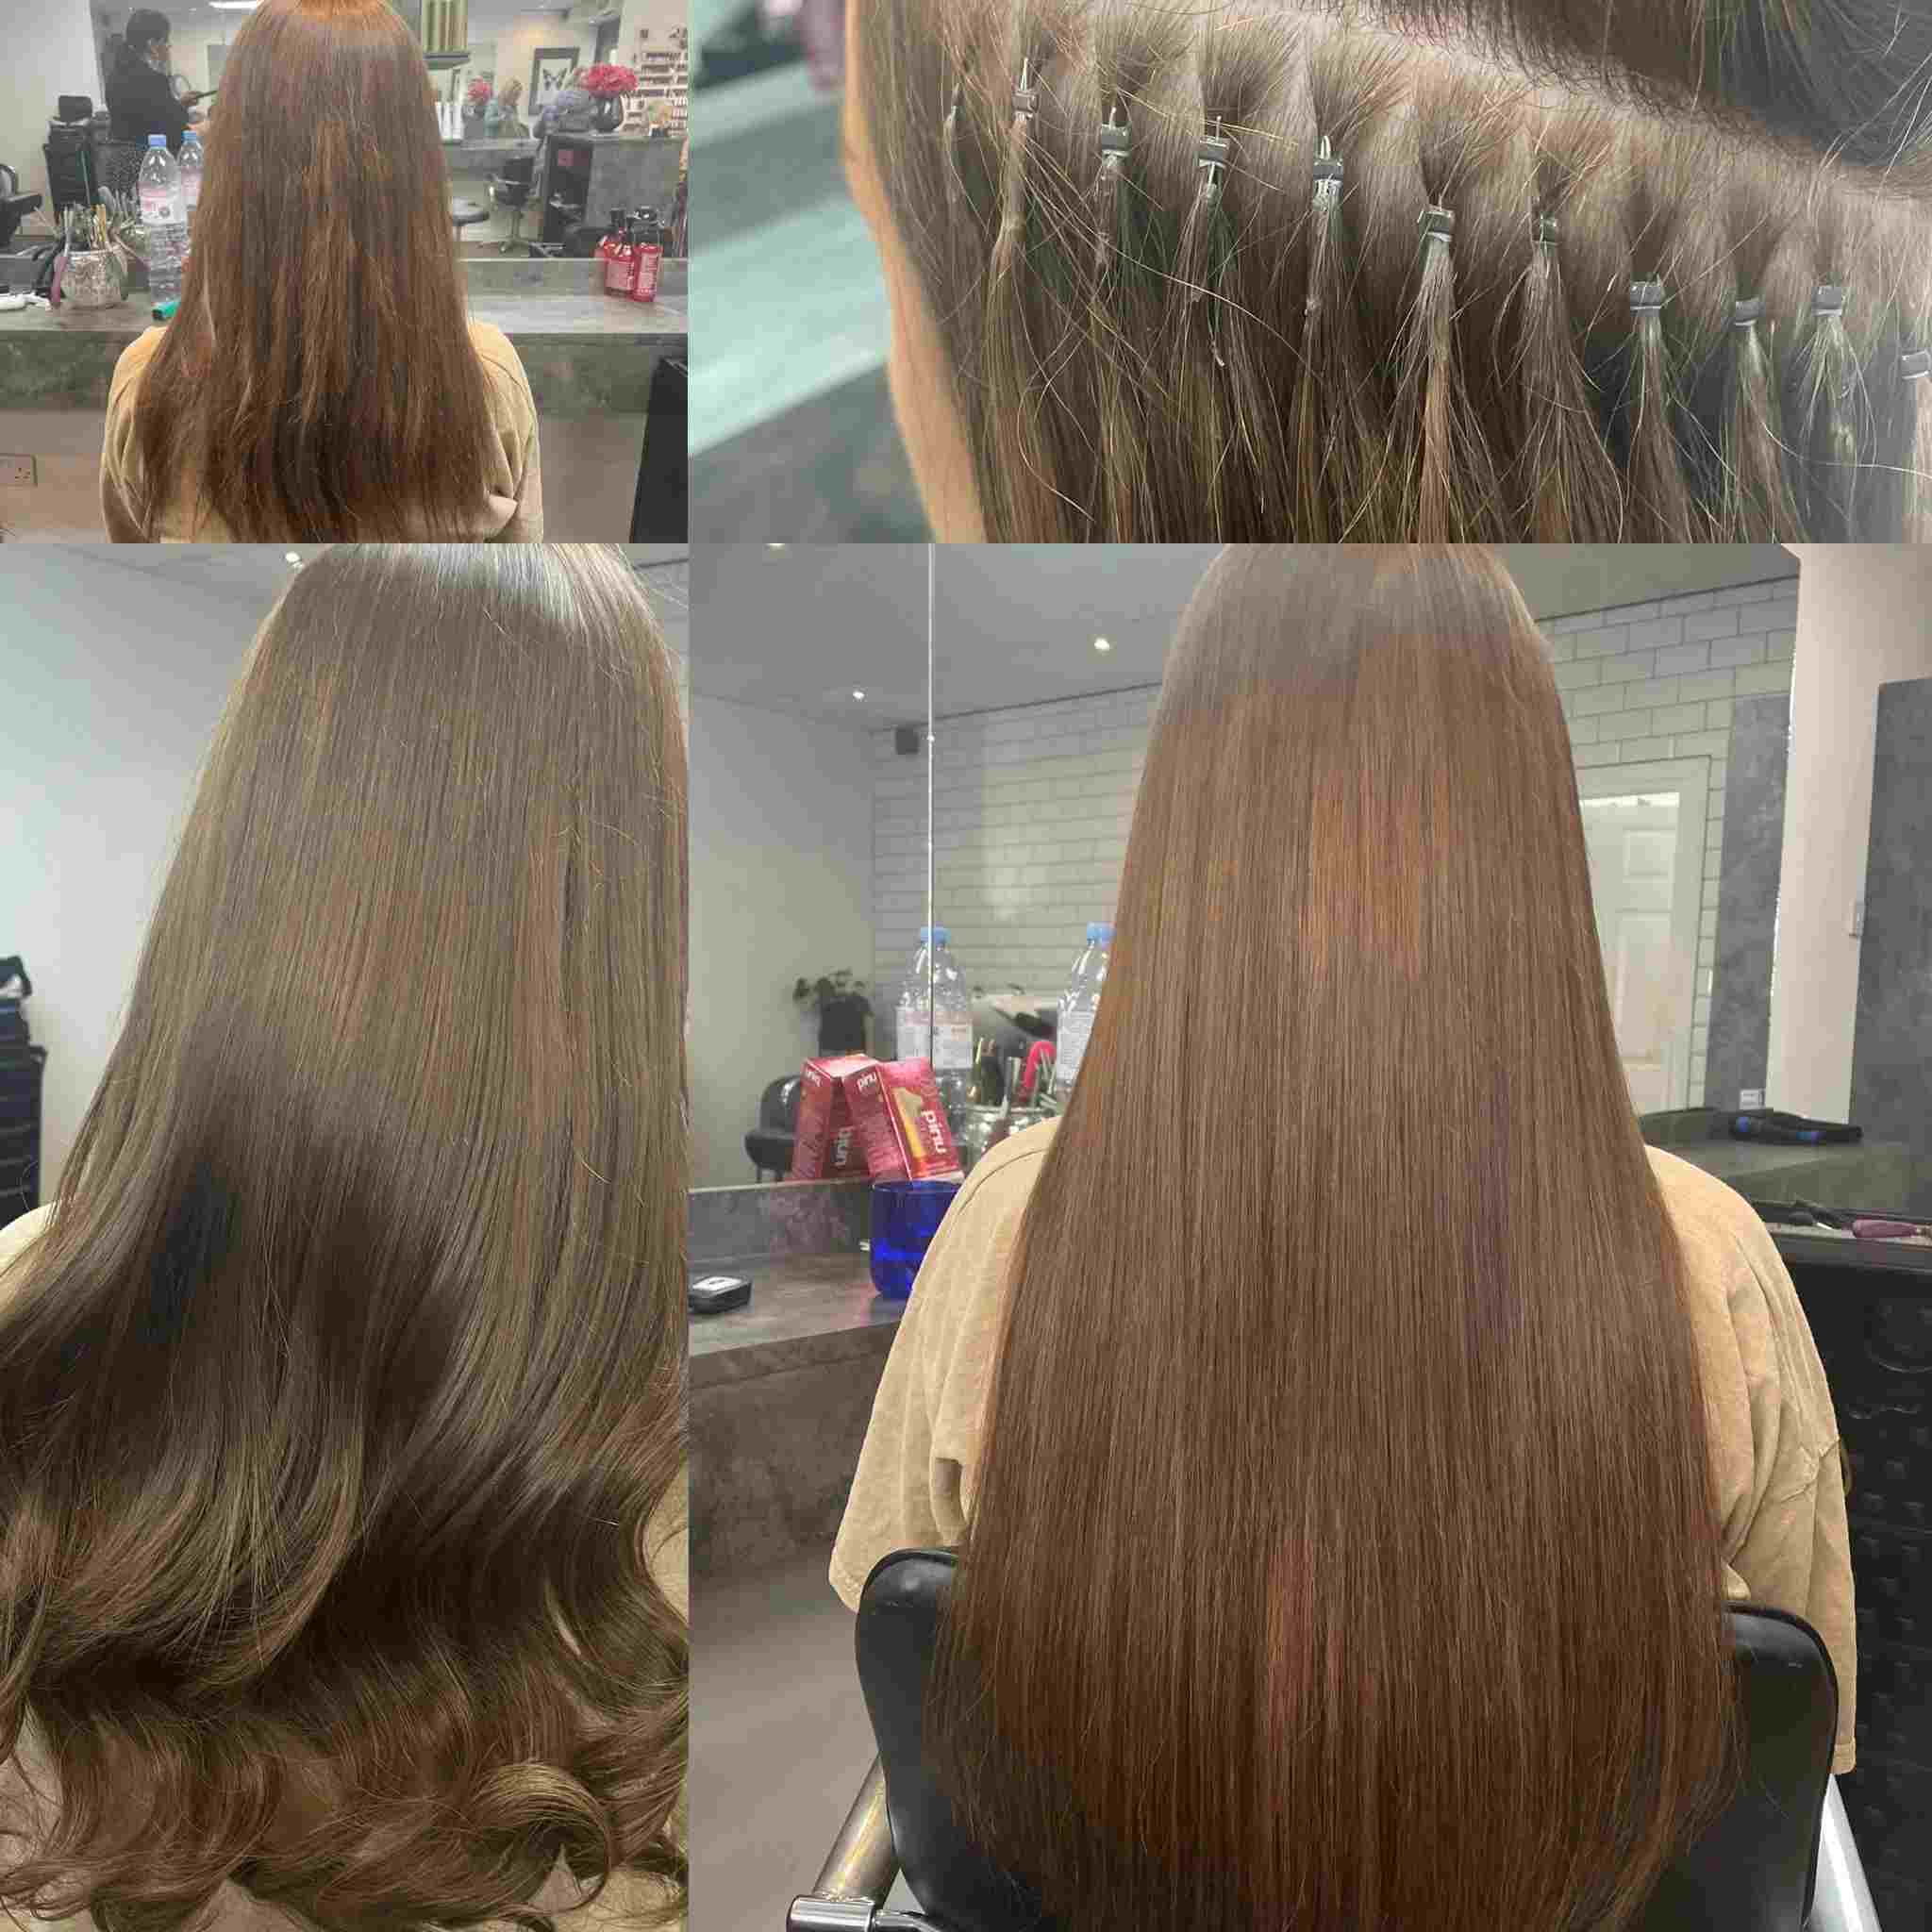 Nano Ring Hair Extensions Online Course - Advanced Techniques by Che Academy